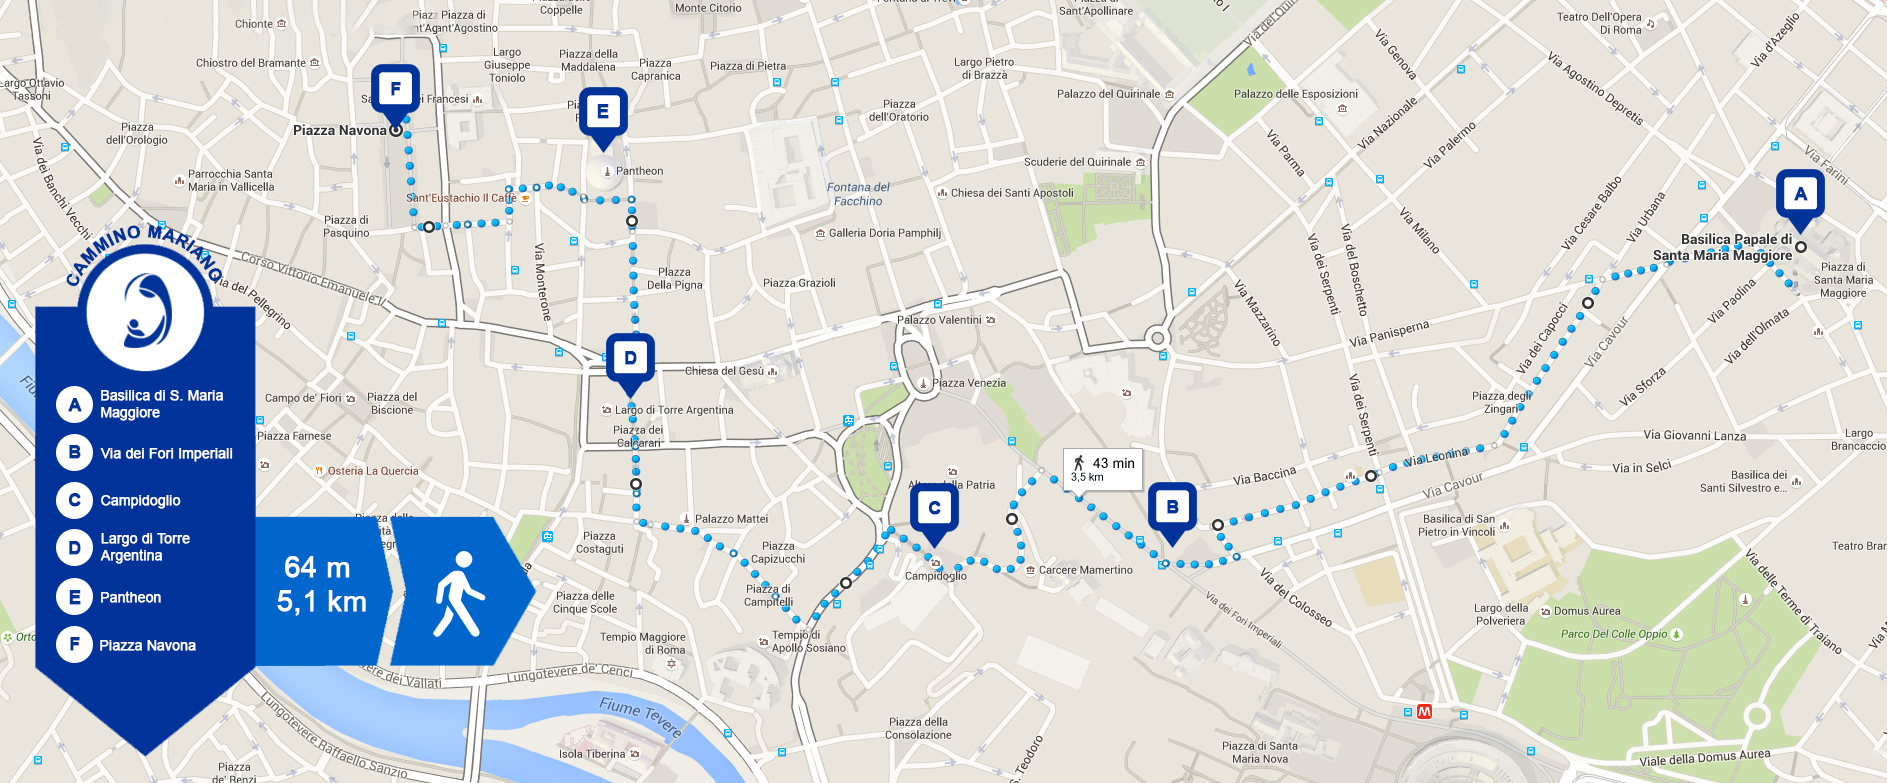 The Marian Way is the only one leaving from the Basilica di Santa Maria Maggiore. It's slightly over 5 km